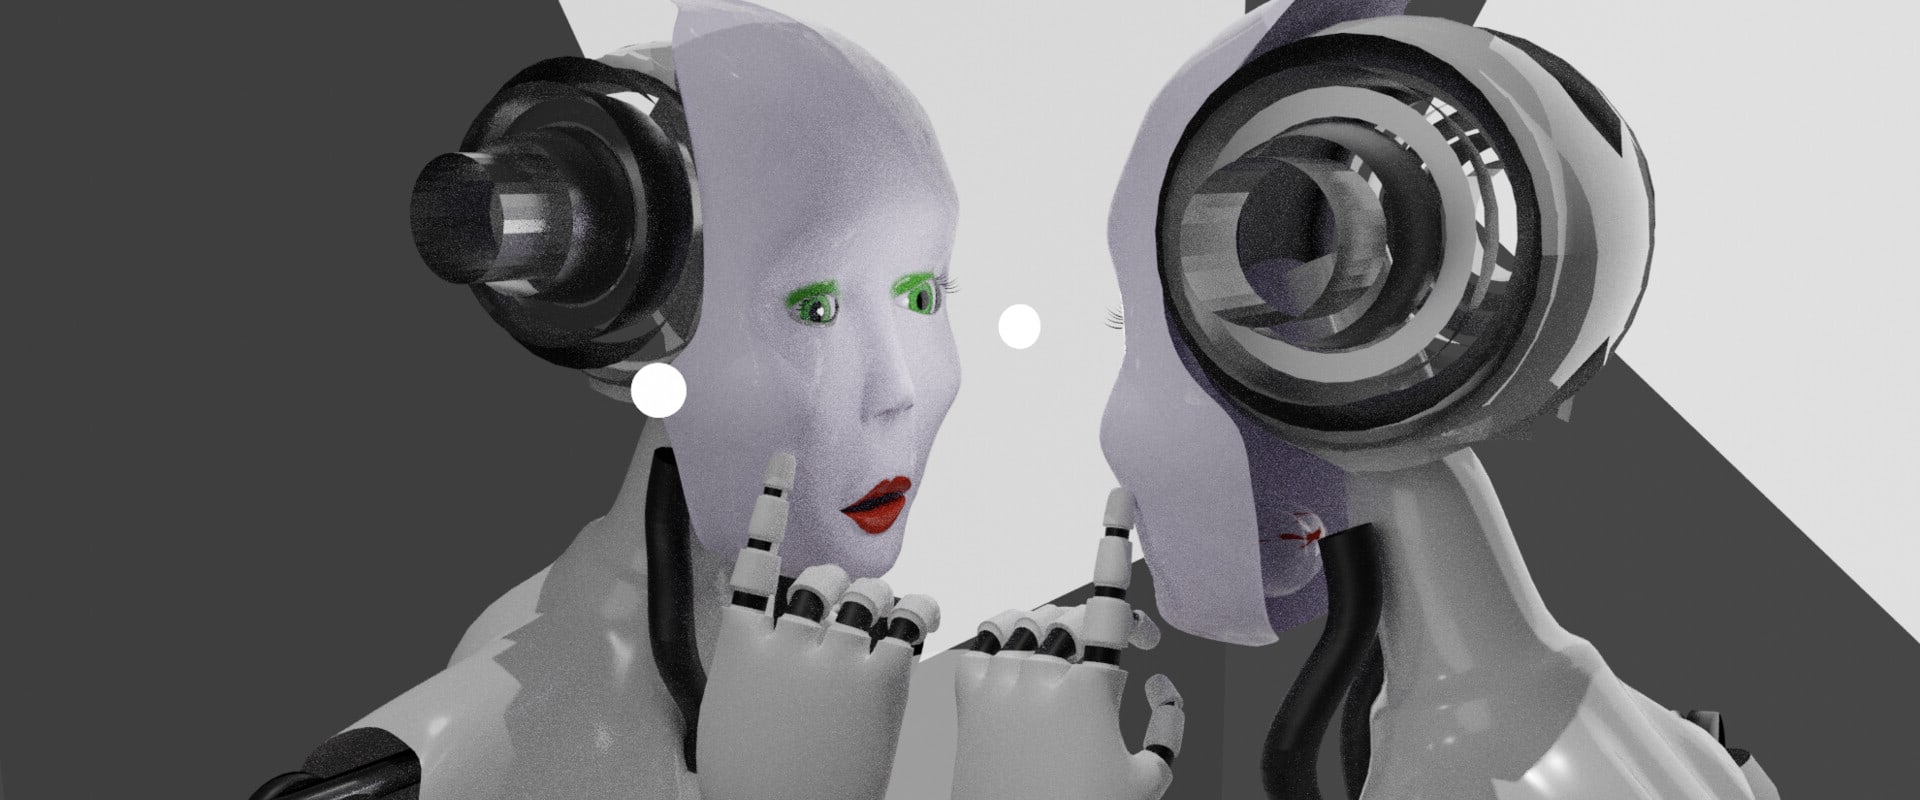 Can Machines Become Self-Aware? A Look at the Possibilities